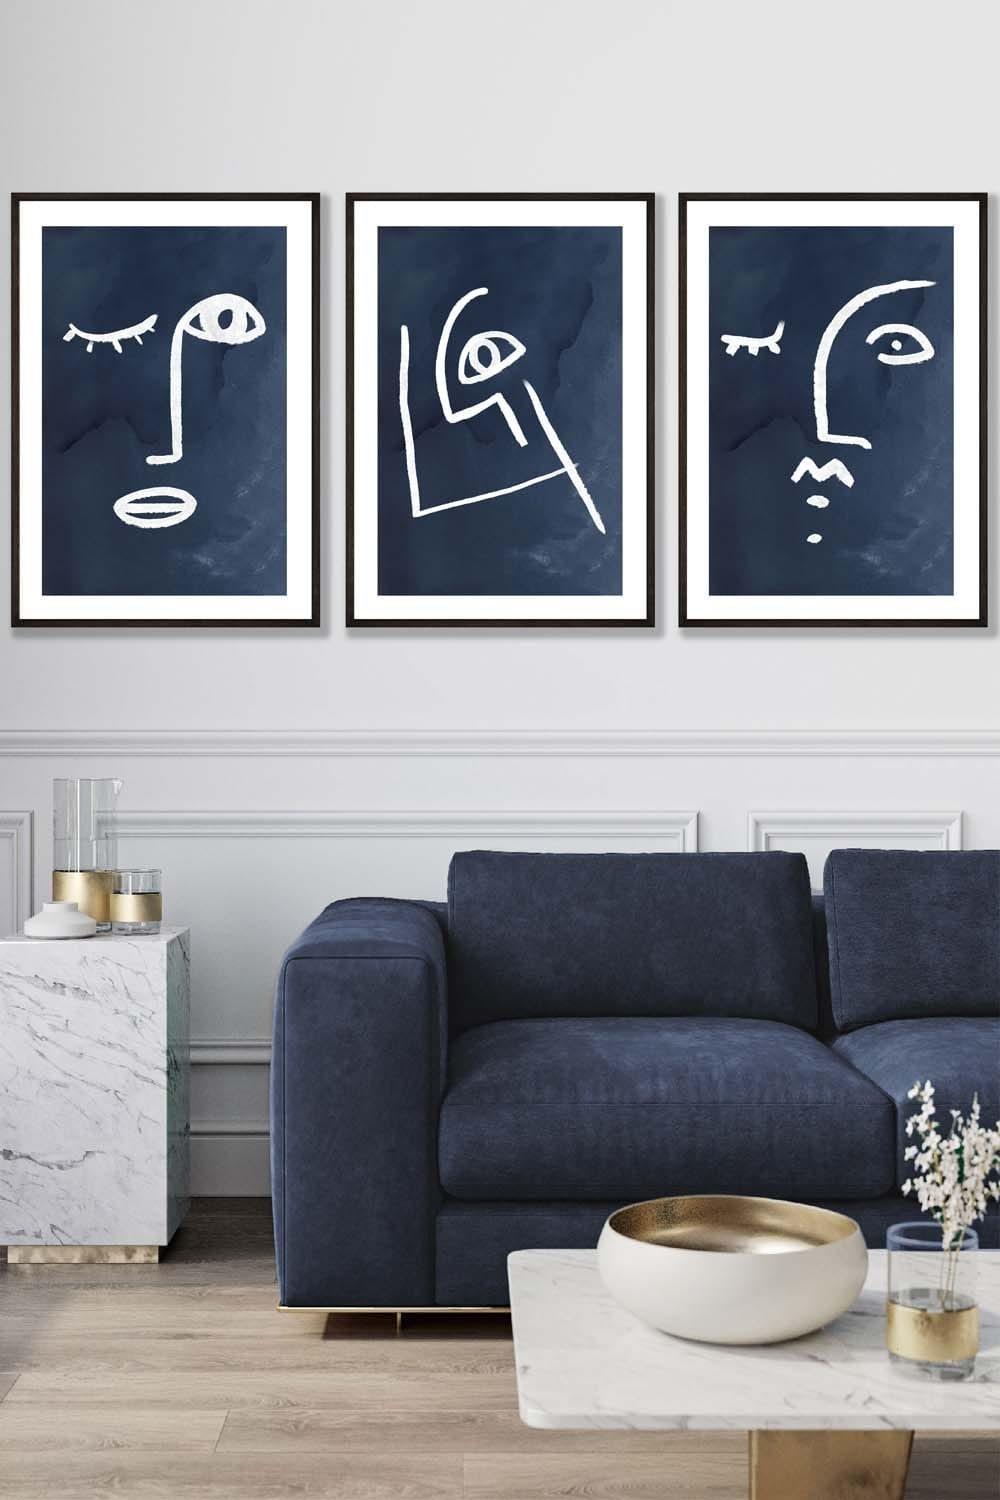 Set of 3 Black Framed Navy and White Abstract Line Art Faces Wall Art